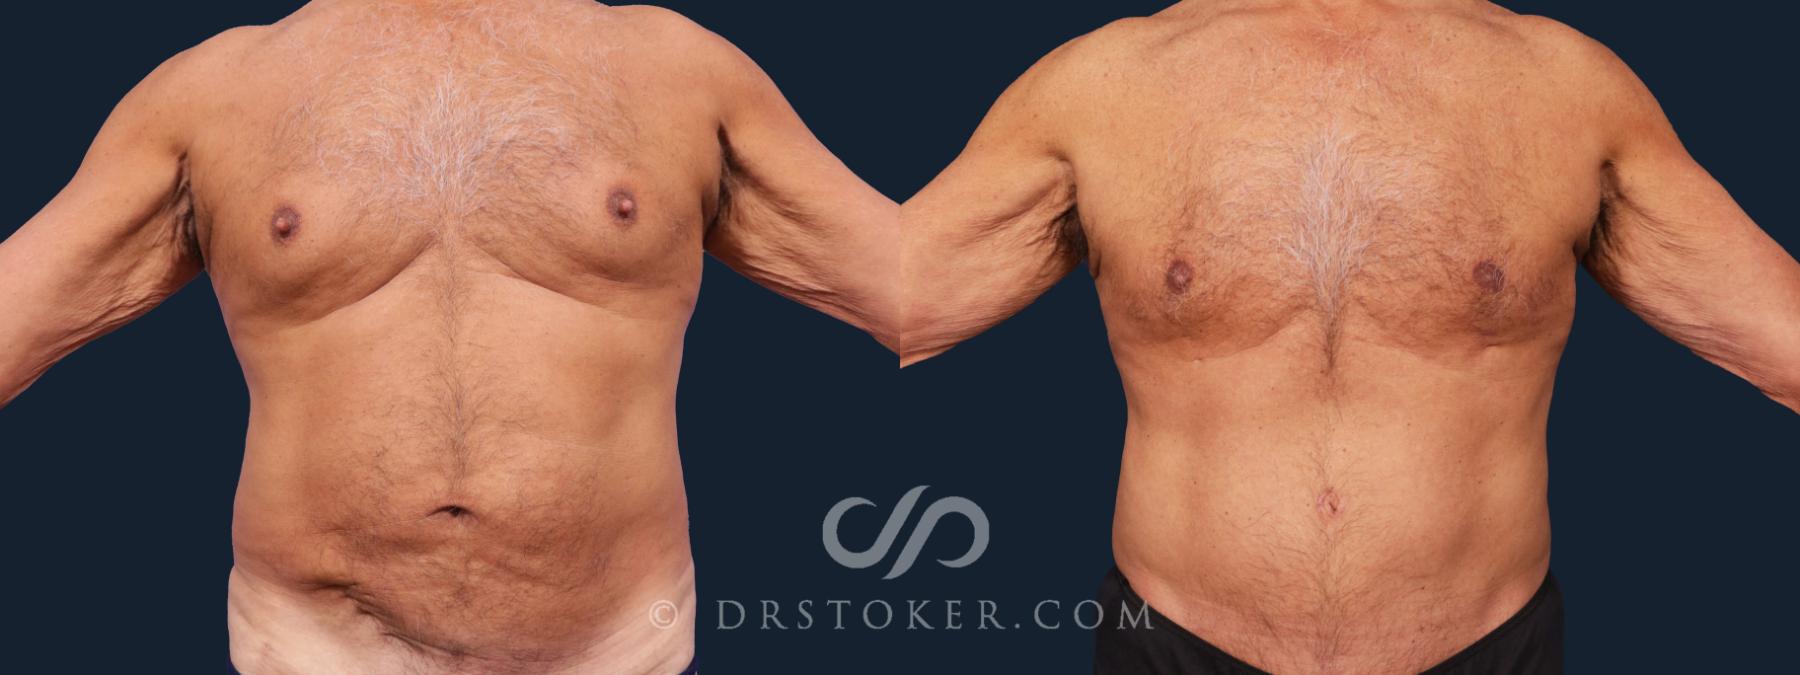 Before & After Tummy Tuck for Men Case 2006 Front View in Los Angeles, CA